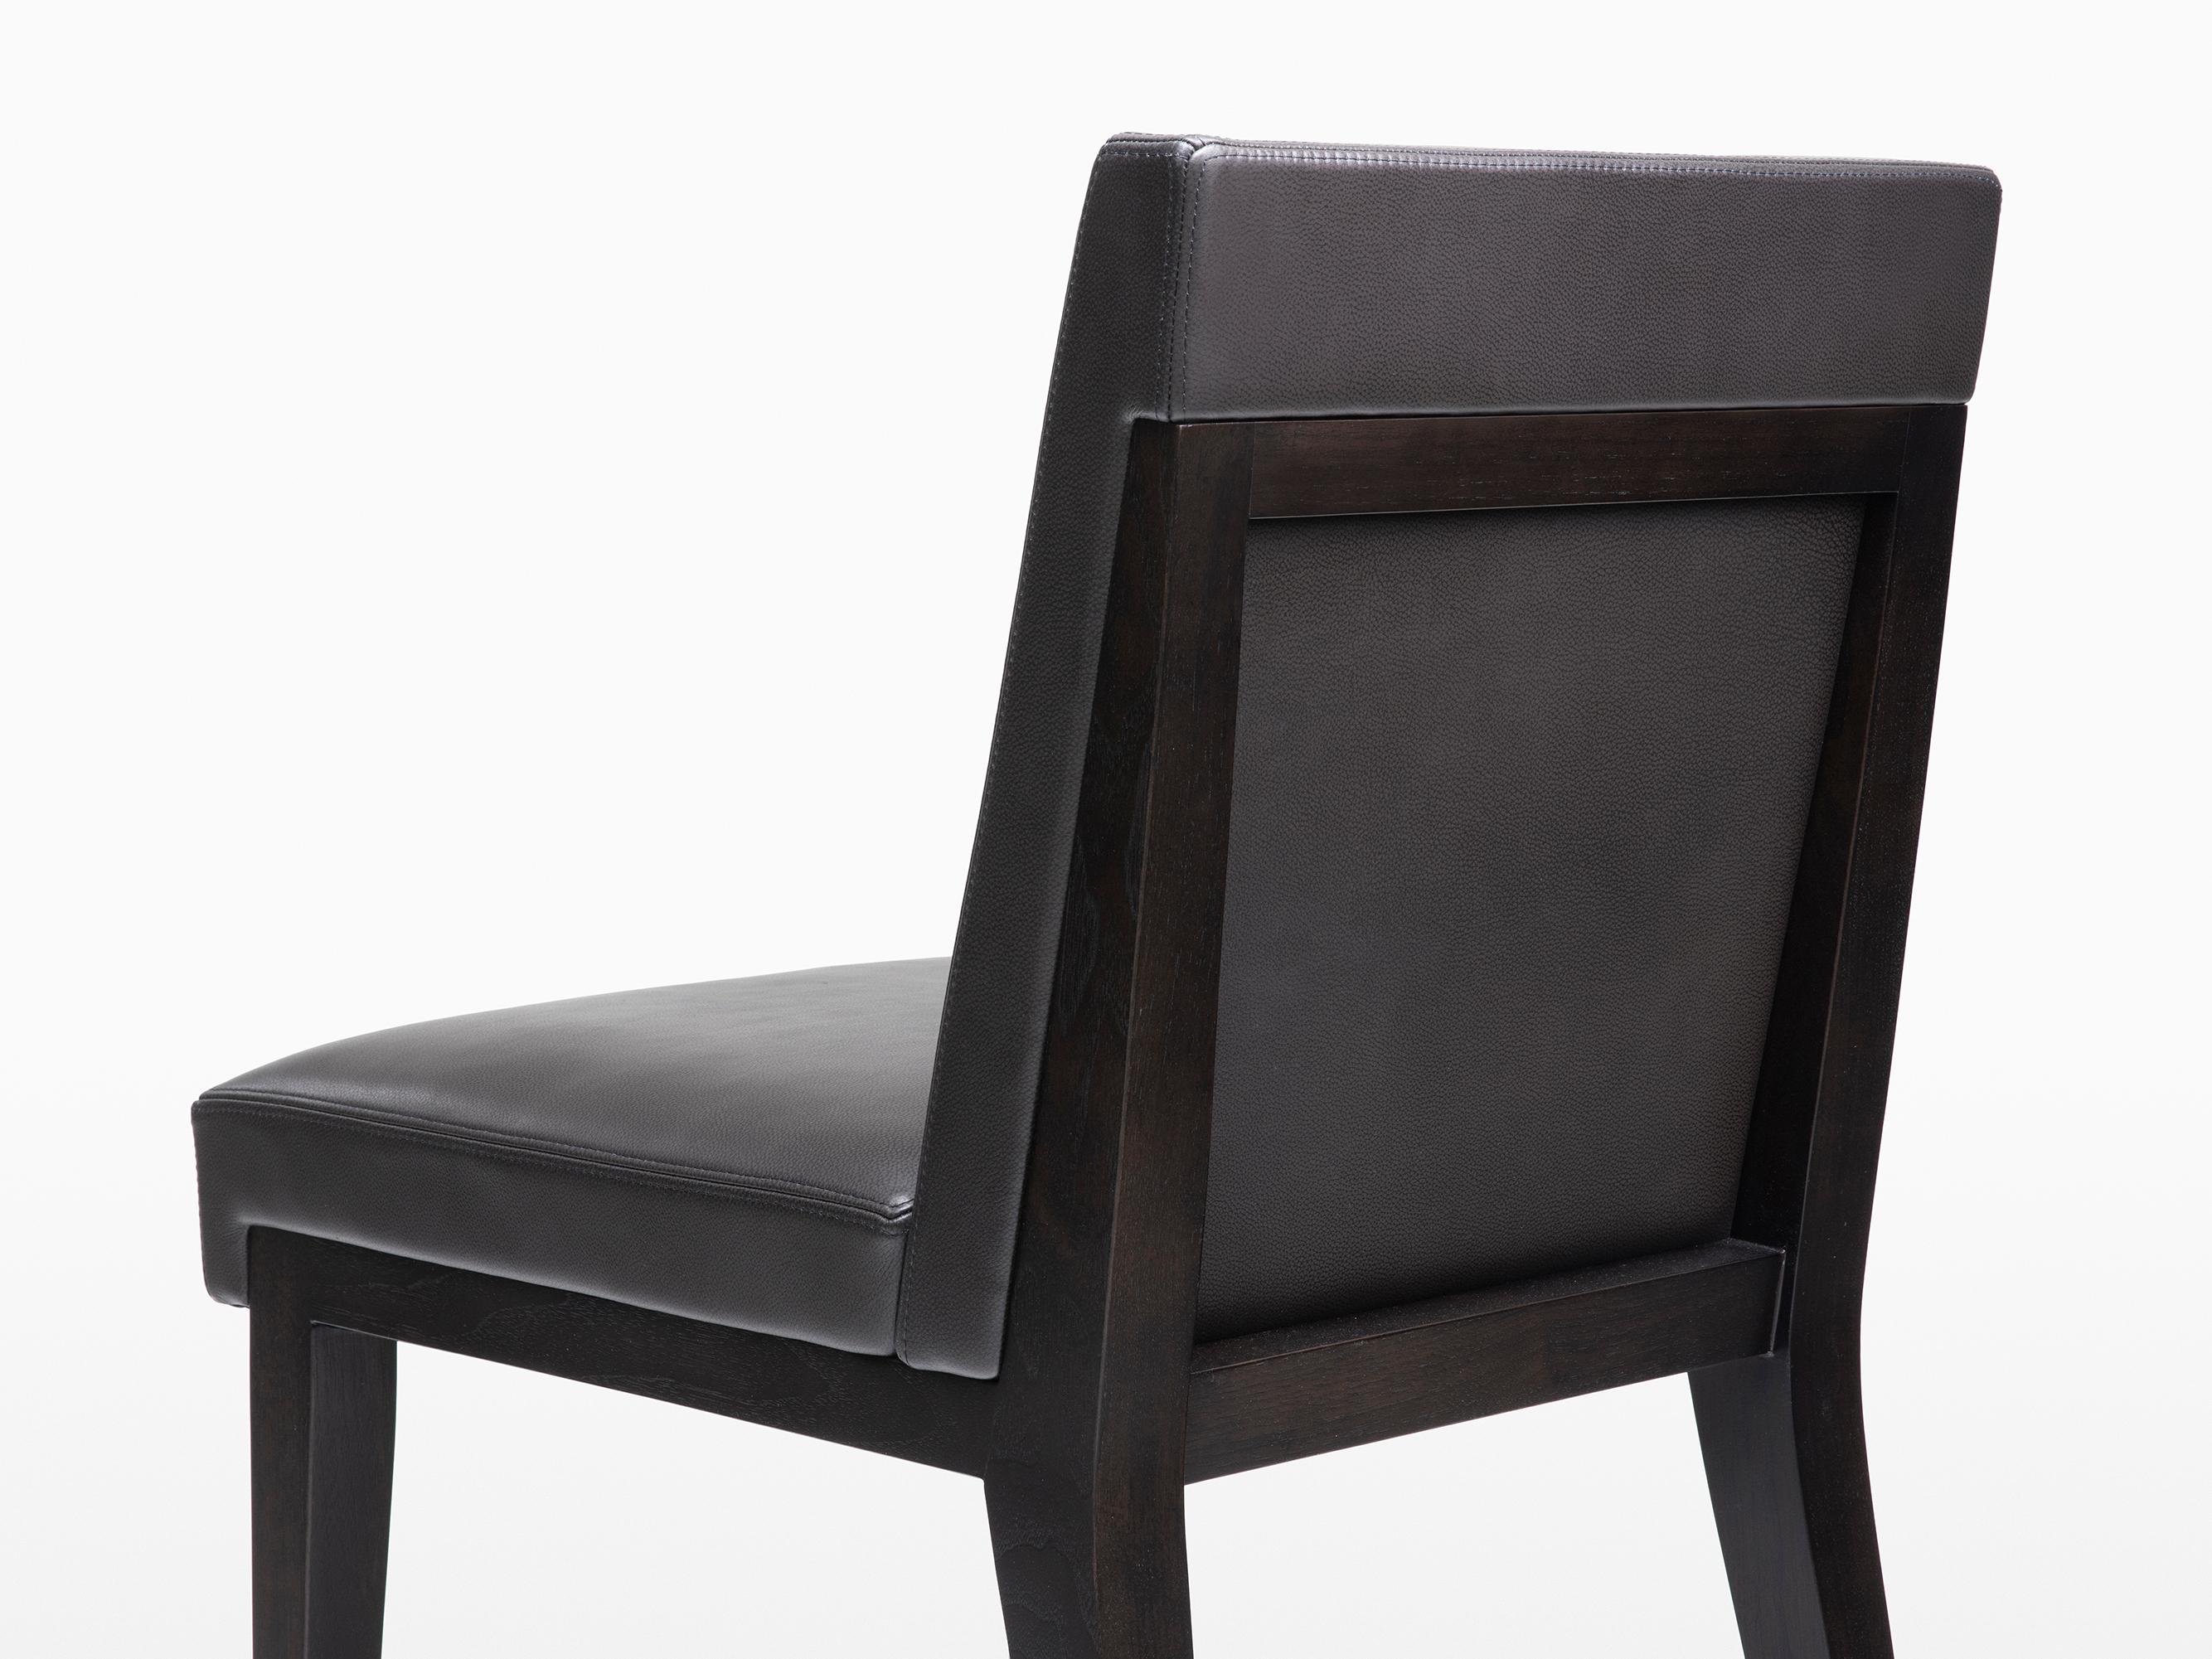 HOLLY HUNT Hampton dining side chair in walnut black magic with leather upholstery. More than just your classic dining chair, the Hampton dining arm and side chairs are crafted with extra attention to detail and quality. The upholstery goes beyond